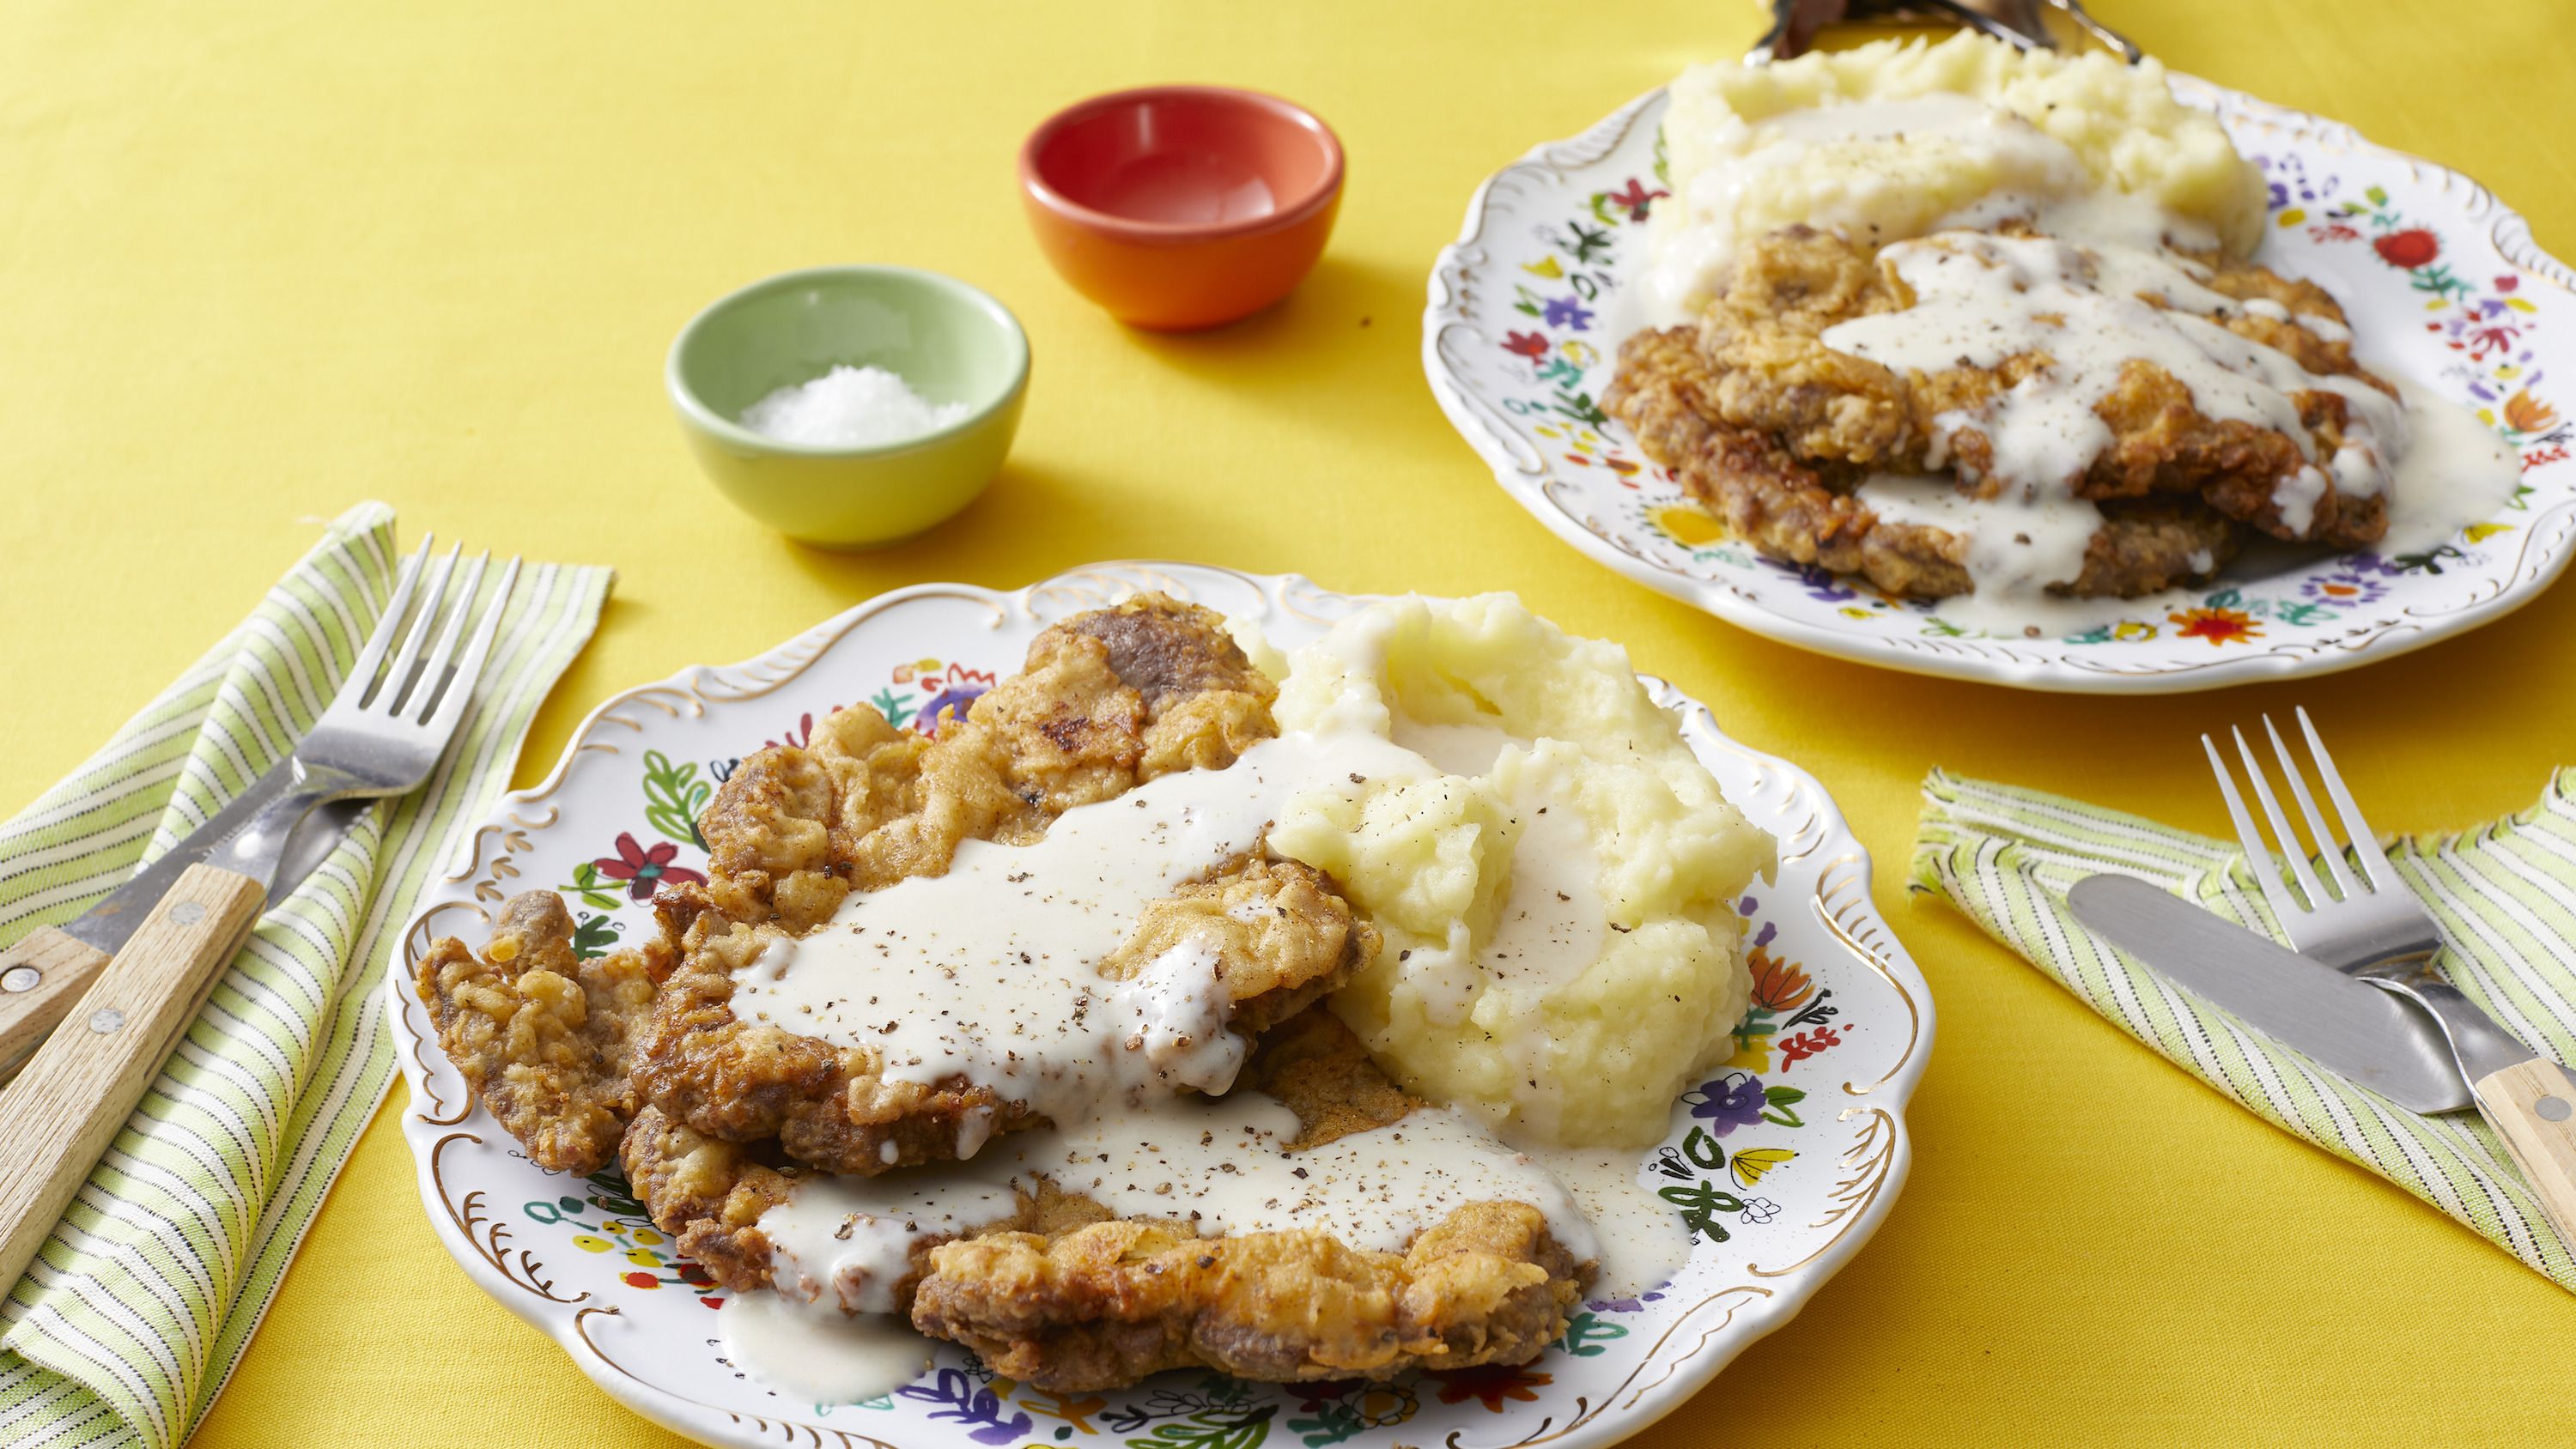 Independence and chicken-fried steak